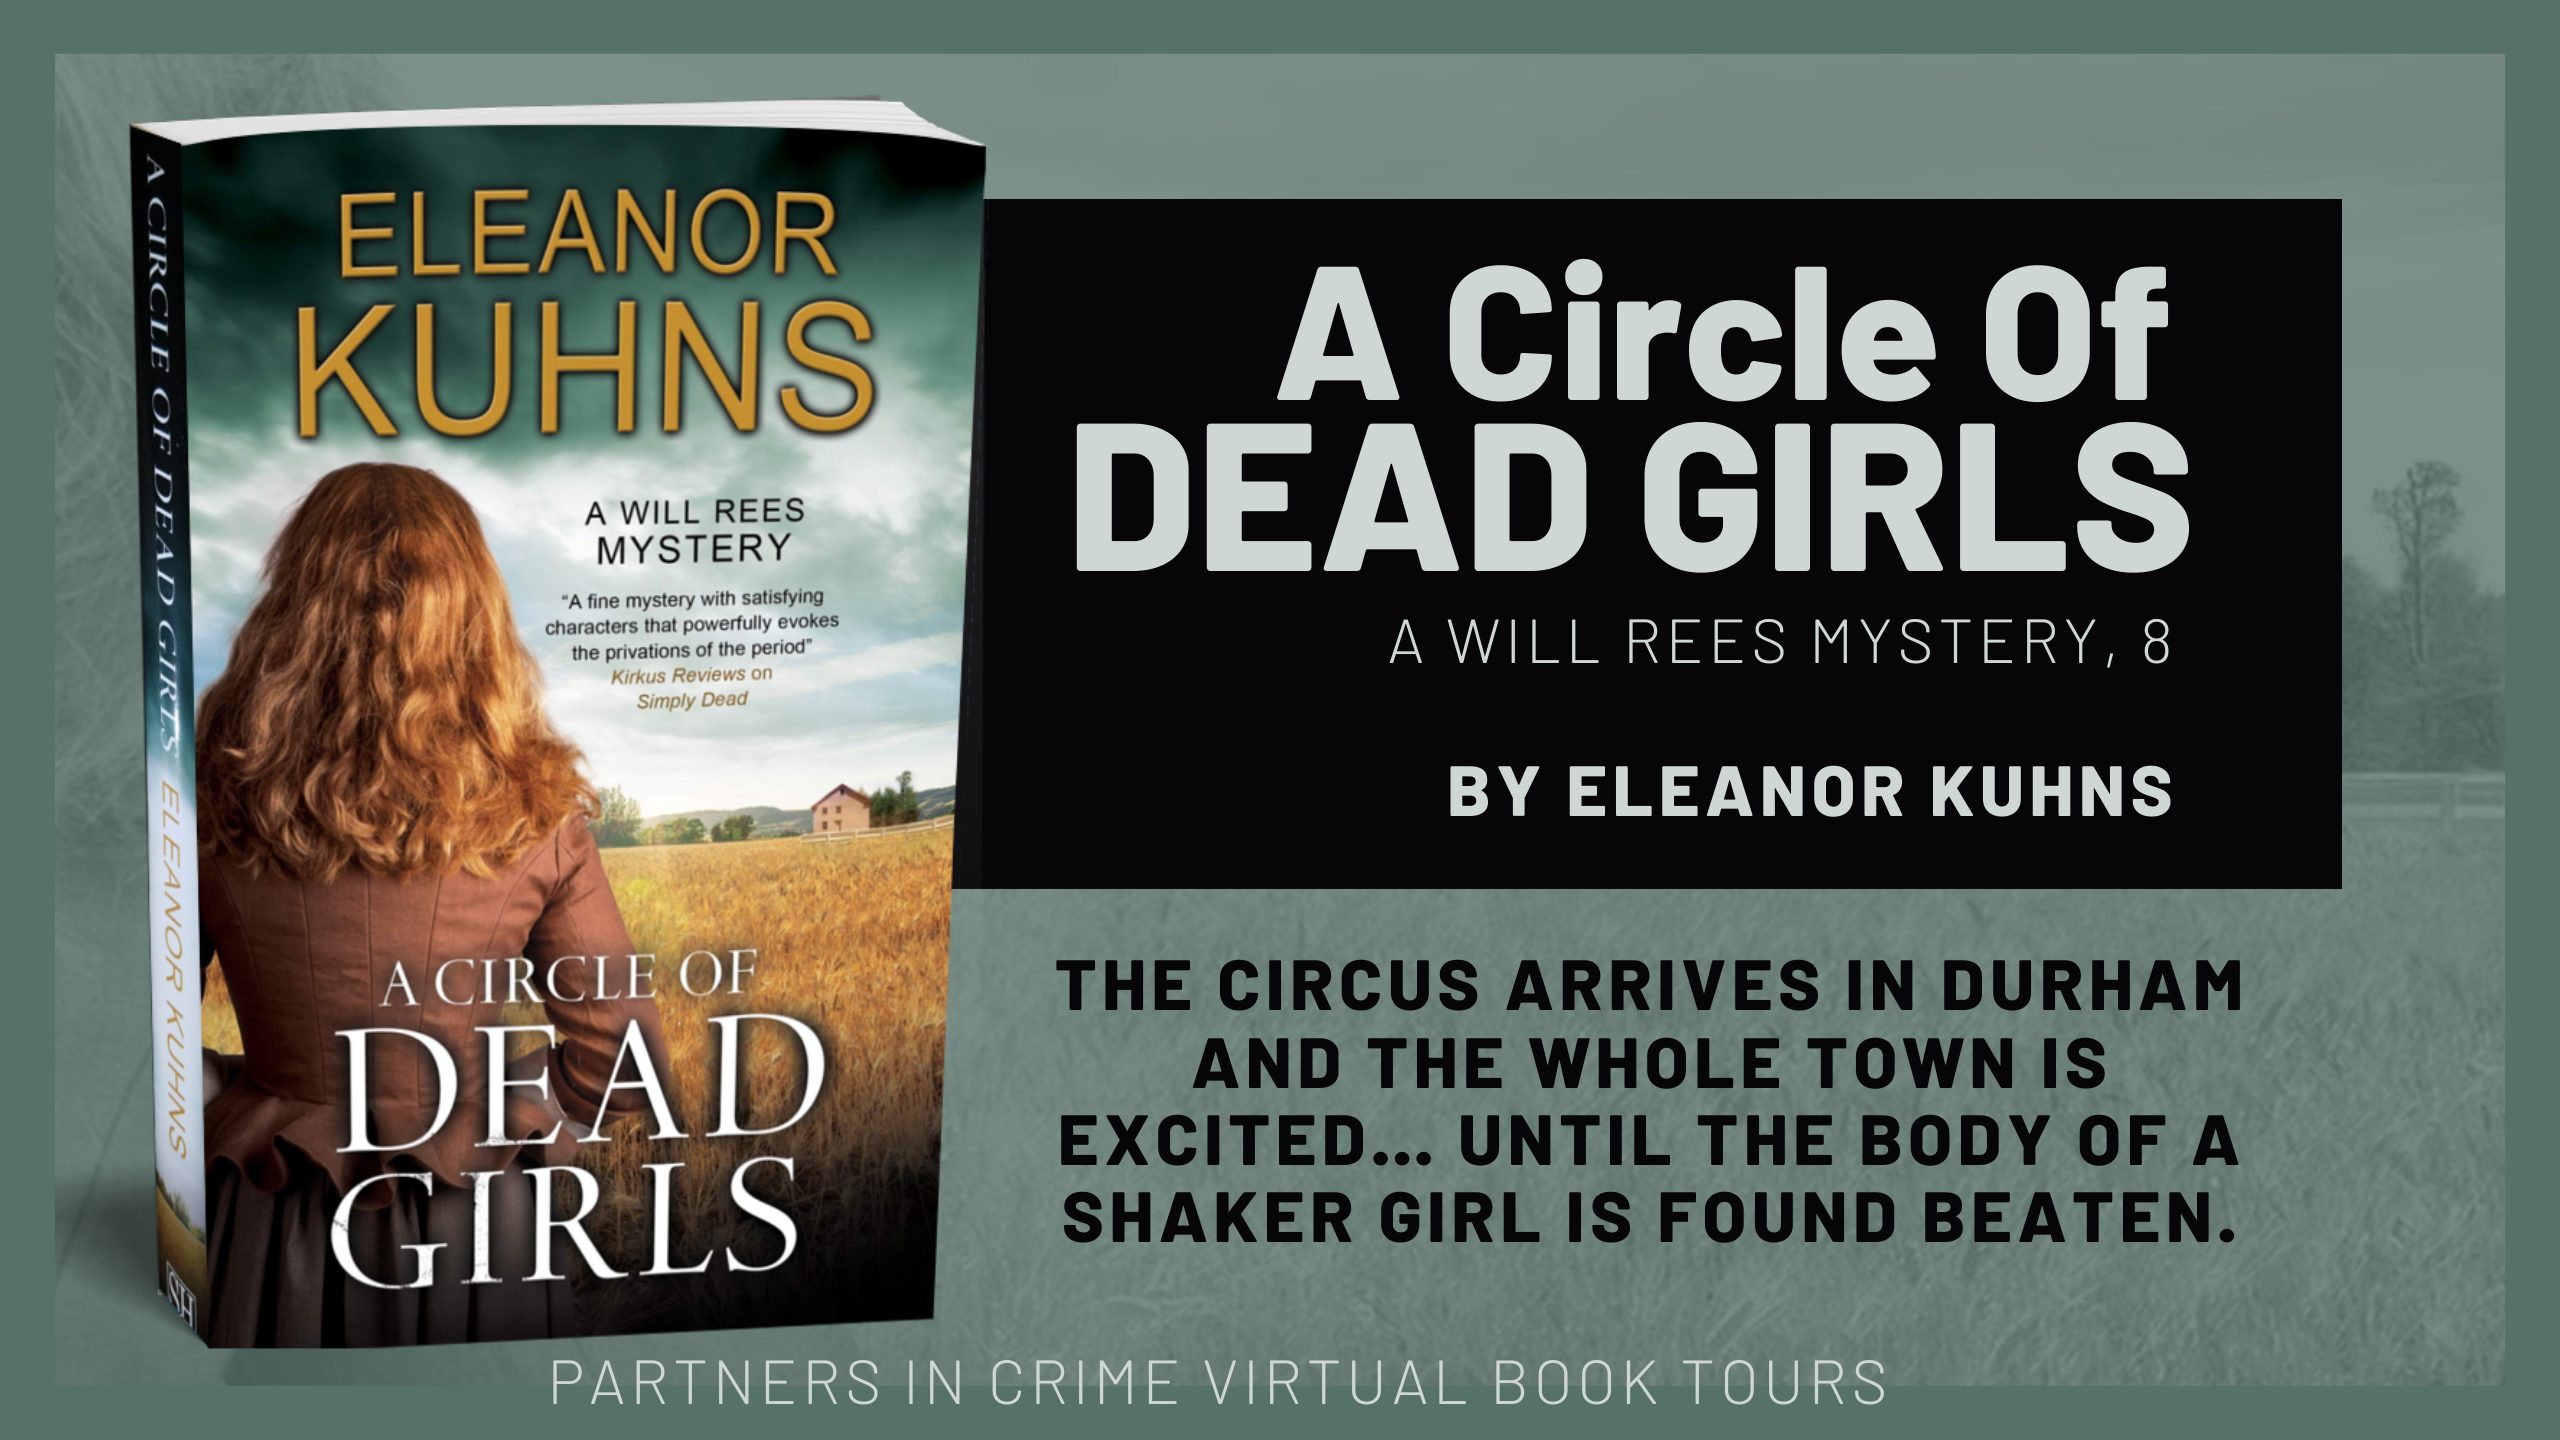 BANNER: A Circle of Dead Girls by Eleanor Kuhns